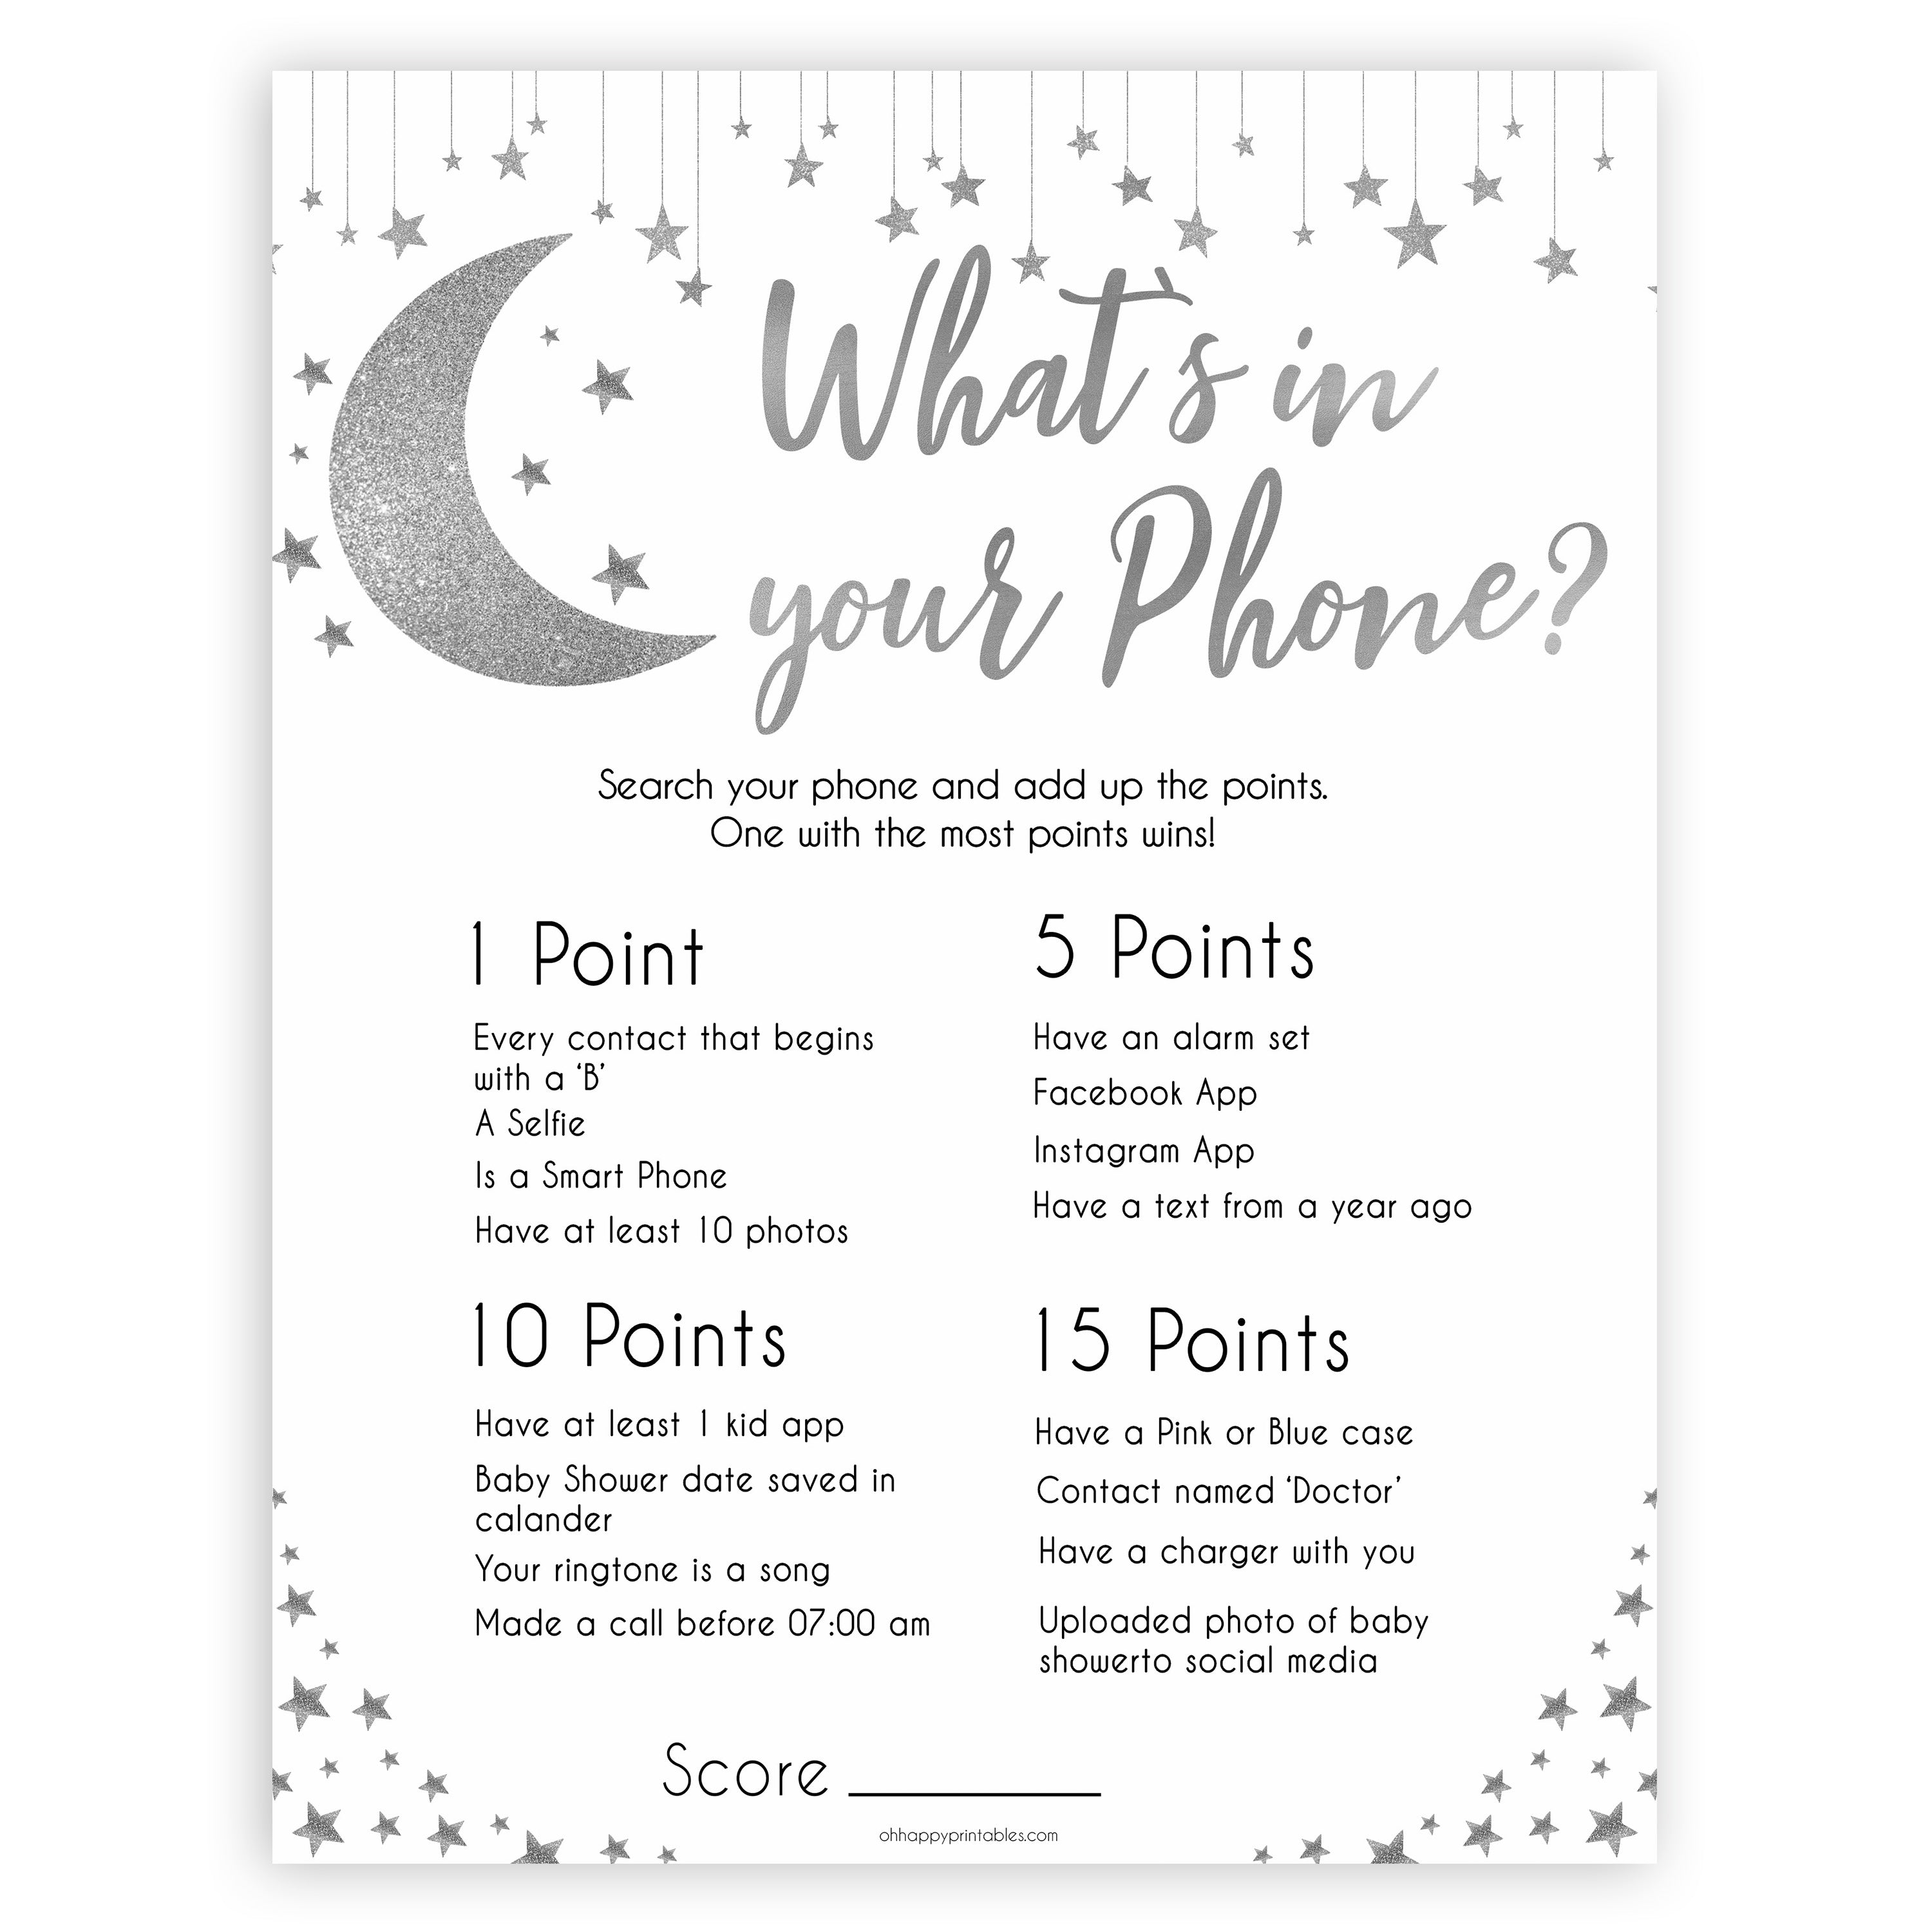 Silver little star, whats in your phone baby games, baby shower games, printable baby games, fun baby games, twinkle little star games, baby games, fun baby shower ideas, baby shower ideas